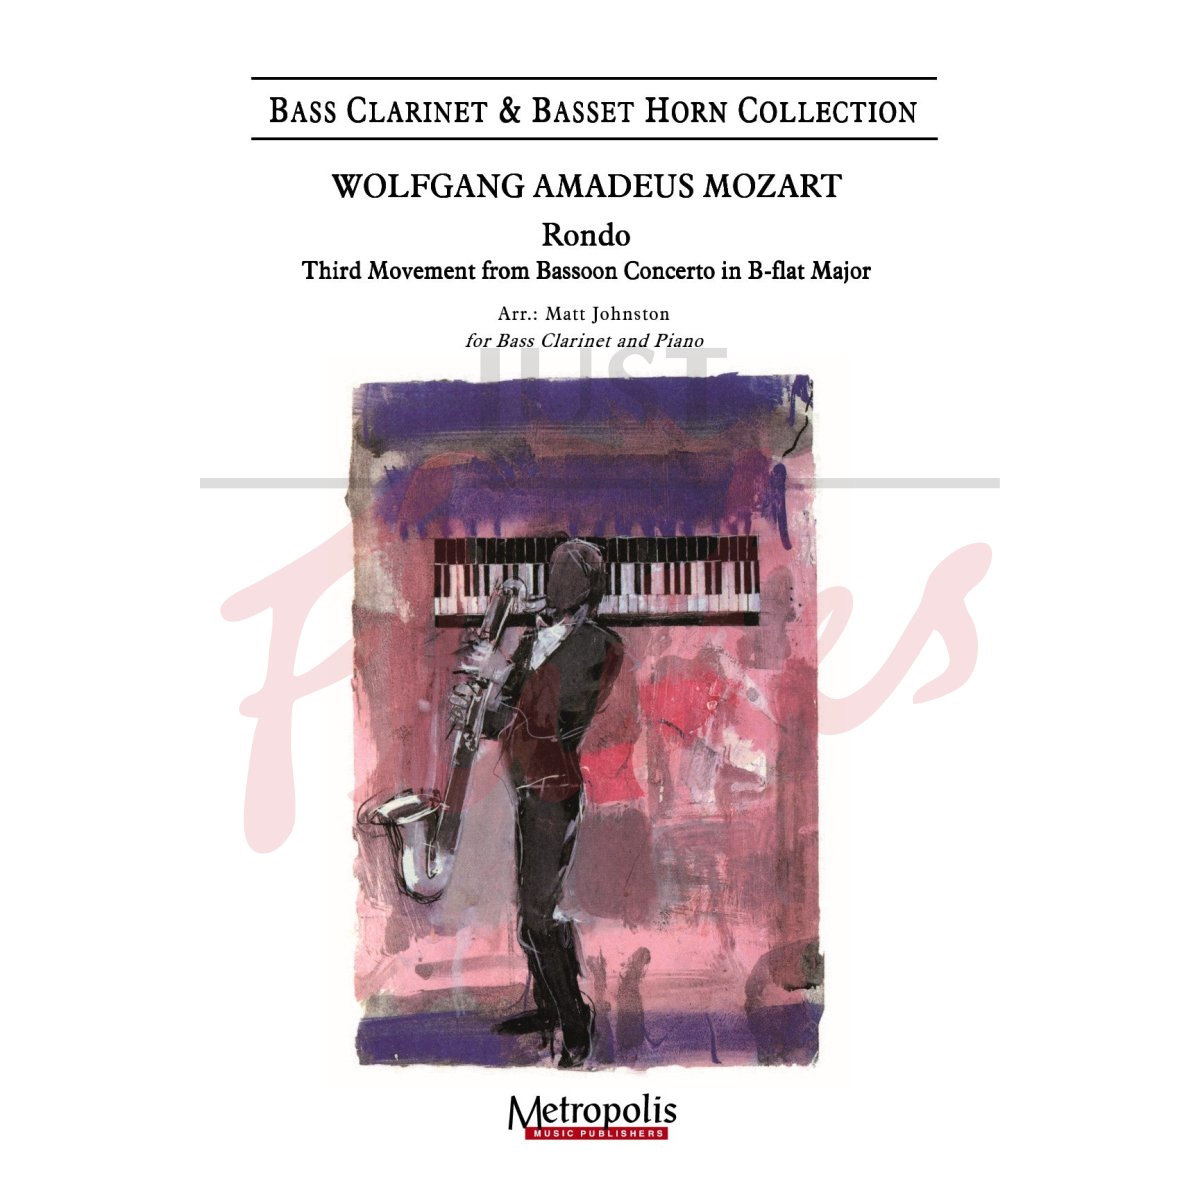 Rondo - Third Movement from Bassoon Concerto for Bass Clarinet and Piano